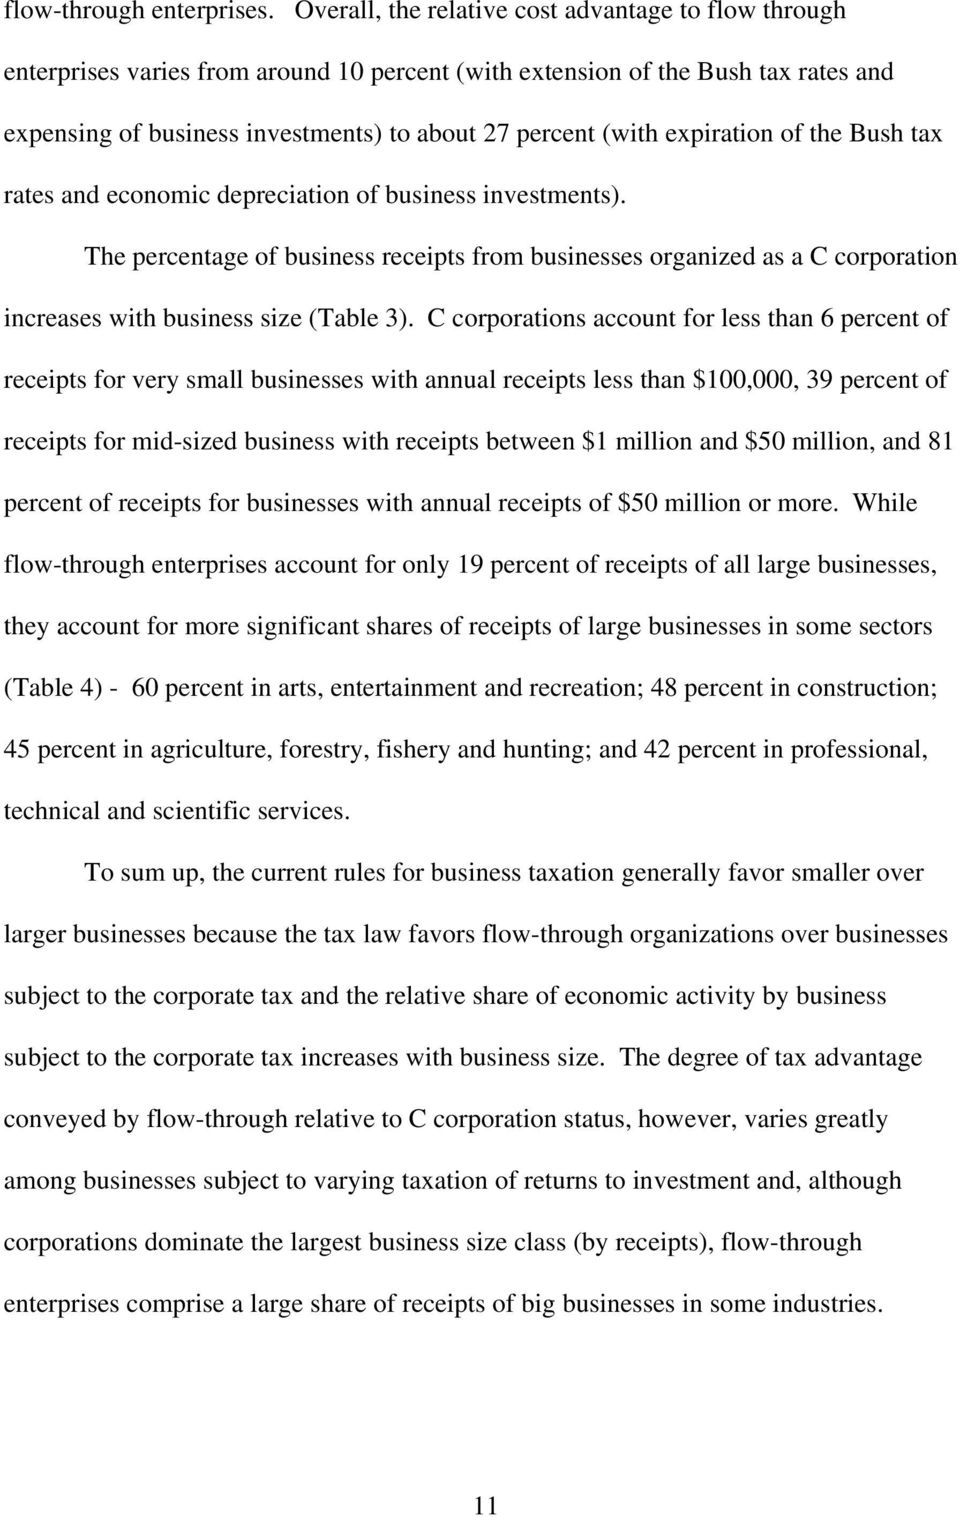 expiration of the Bush tax rates and economic depreciation of business investments).